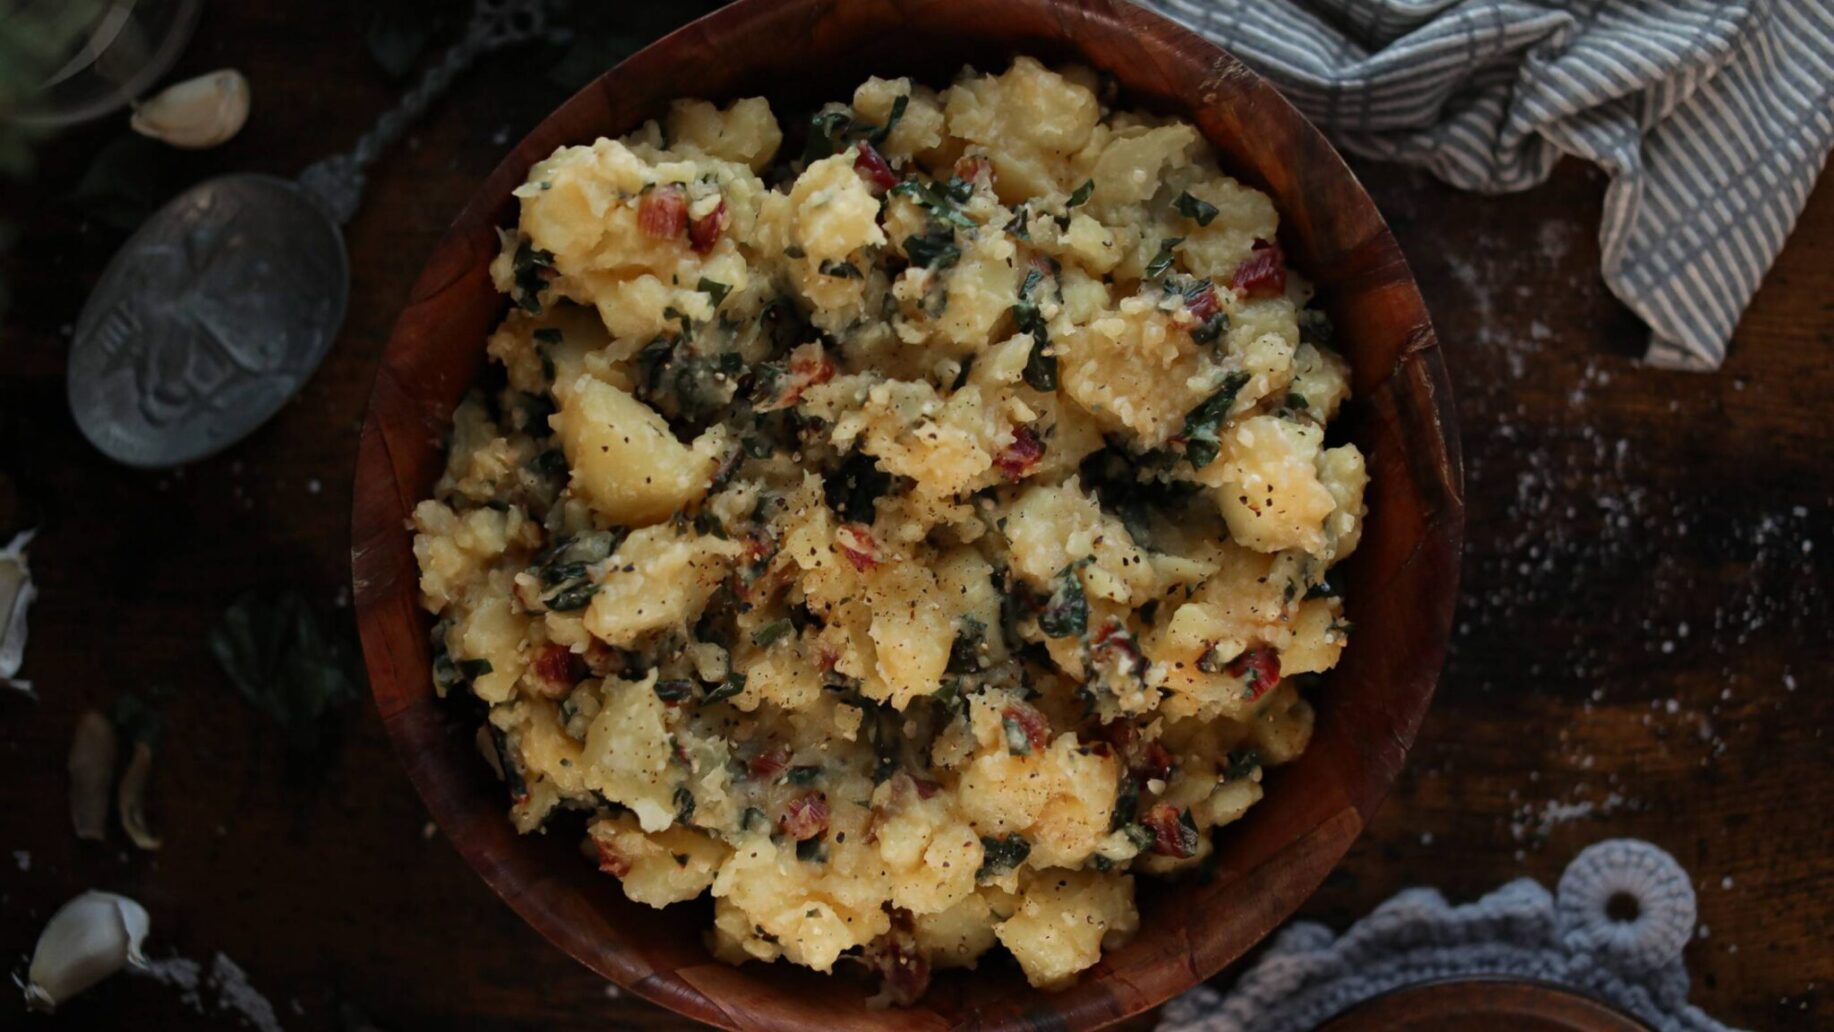 A bowl full of smashed potatoes and Swiss Chard.